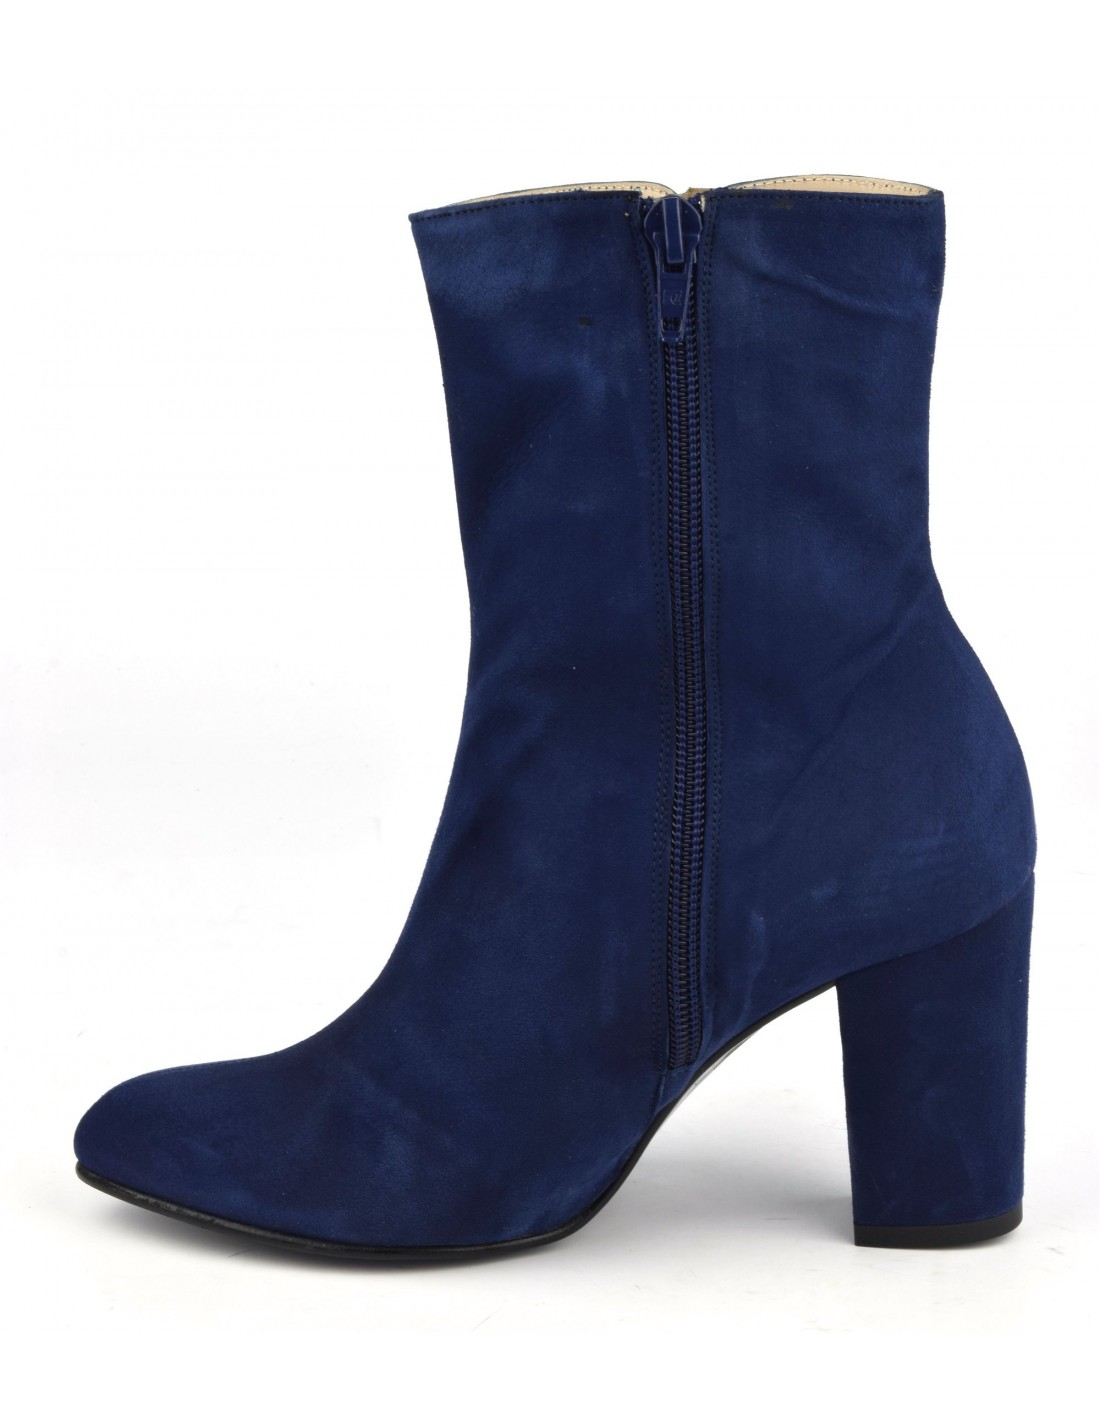 Royal blue suede leather ankle boots, high upper, MI-654, Maria Jamy